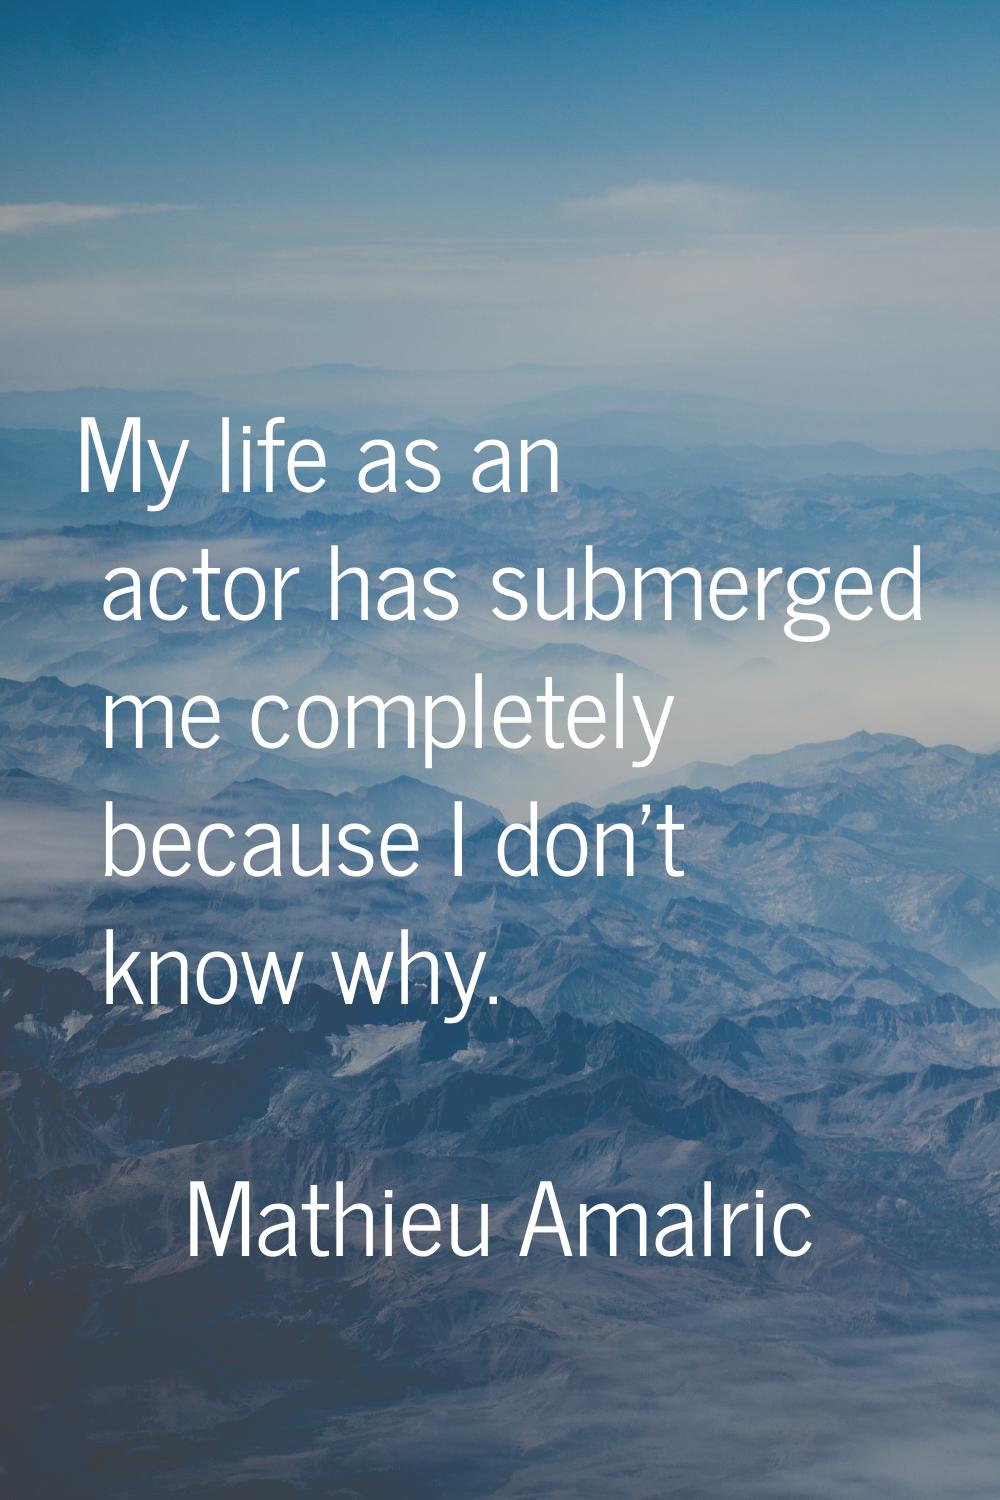 My life as an actor has submerged me completely because I don't know why.